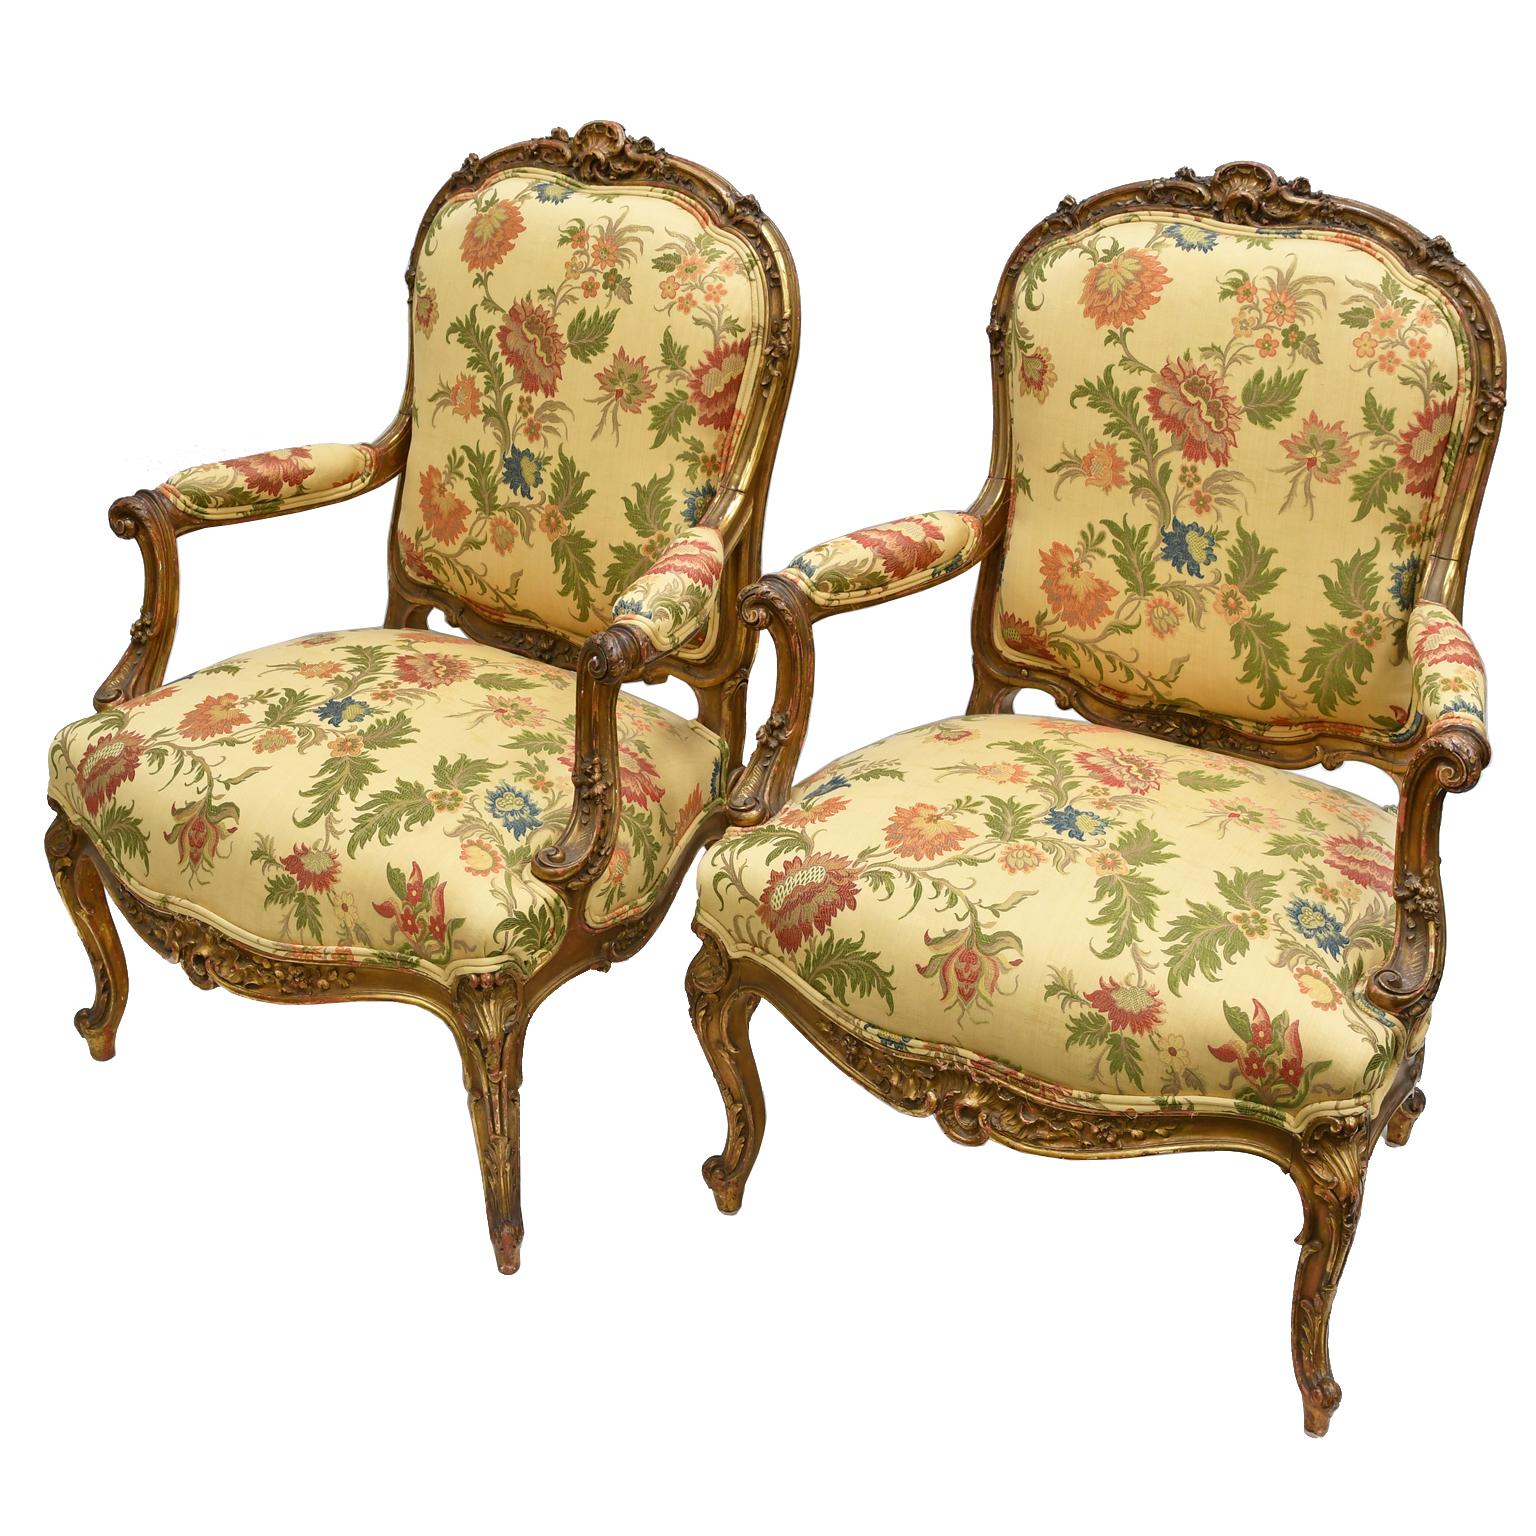 Of the finest quality, a pair of giltwood fauteuils à la reine by celebrated ebeniste, François Linke. Inspired by the French Regency and Louis XV style, this pair of armchairs from the Belle Époque period in France exhibits an extraordinary level